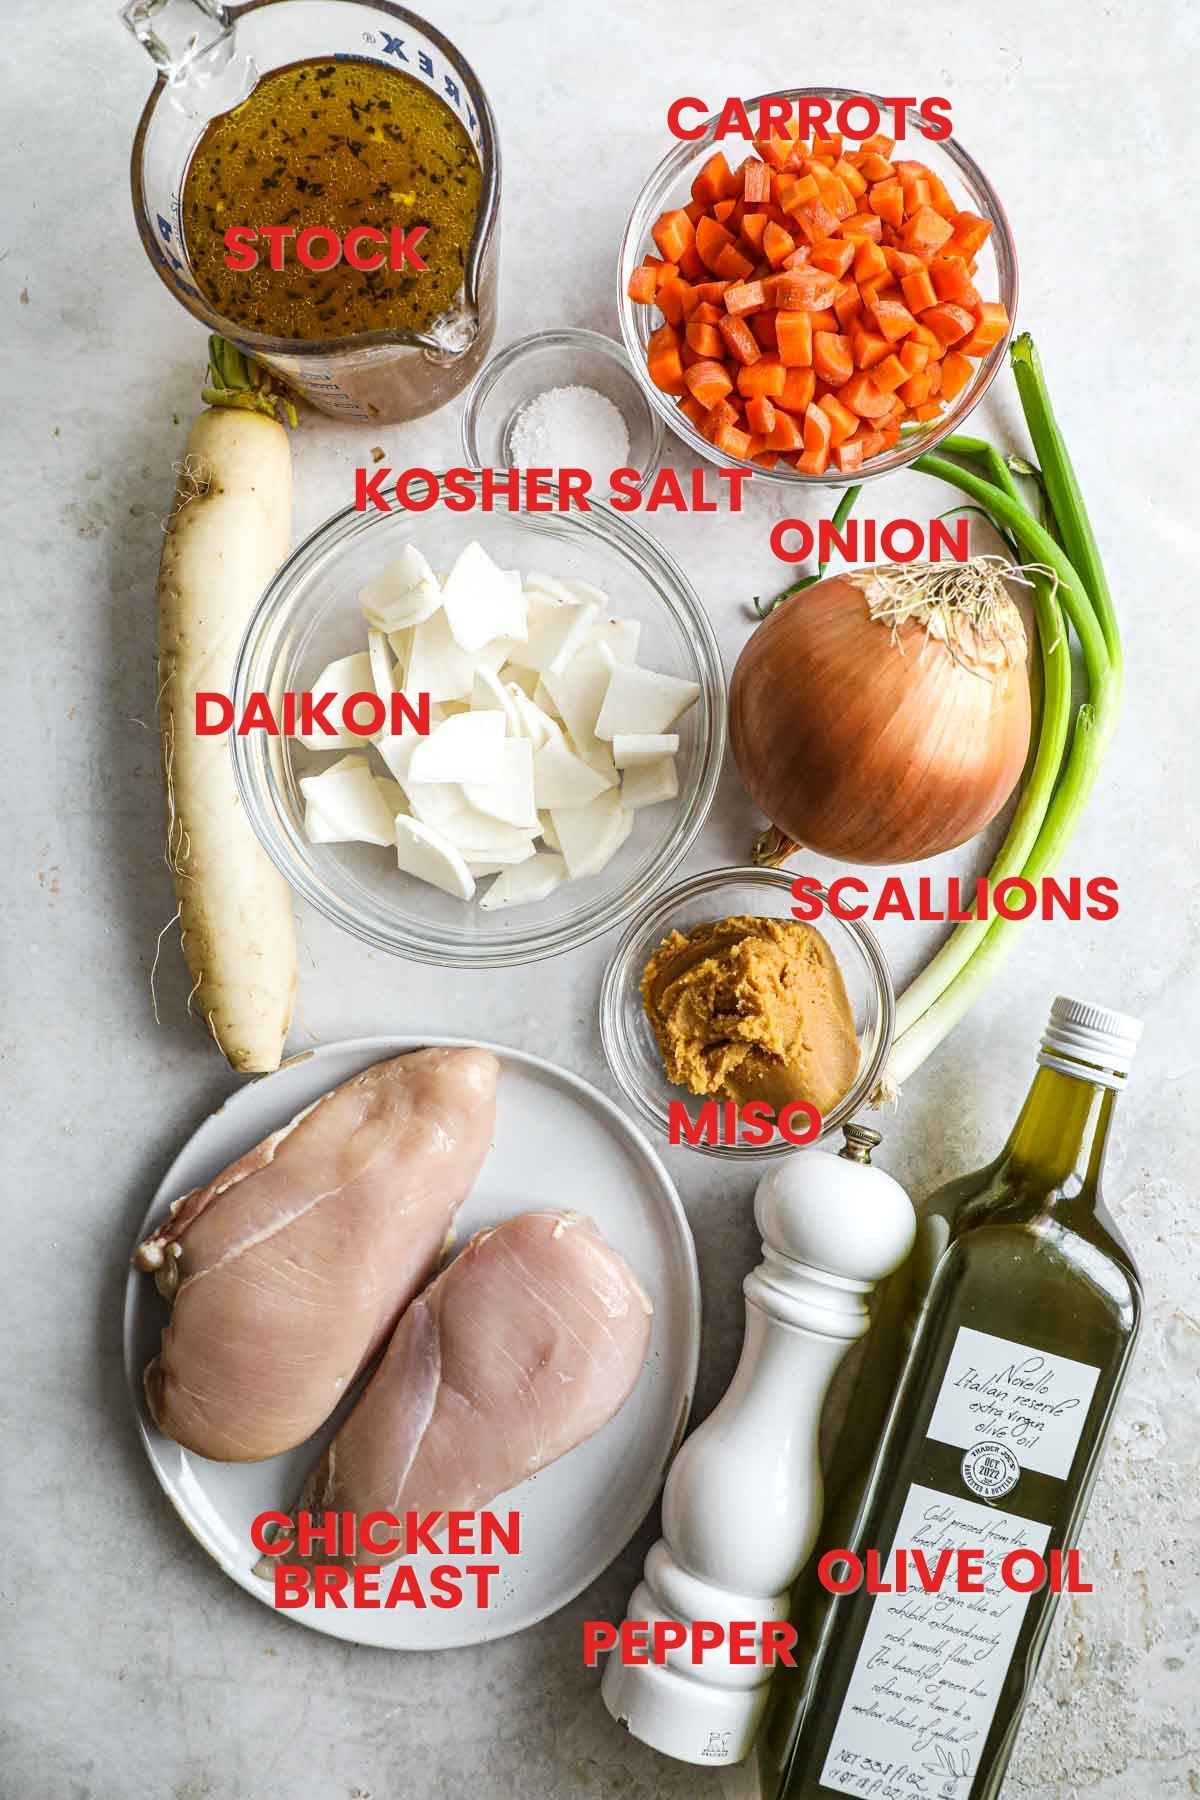 Ingredients to make chicken miso soup with daikon, carrots, chicken breast, onion, miso, scallions, and homemade chicken stock.